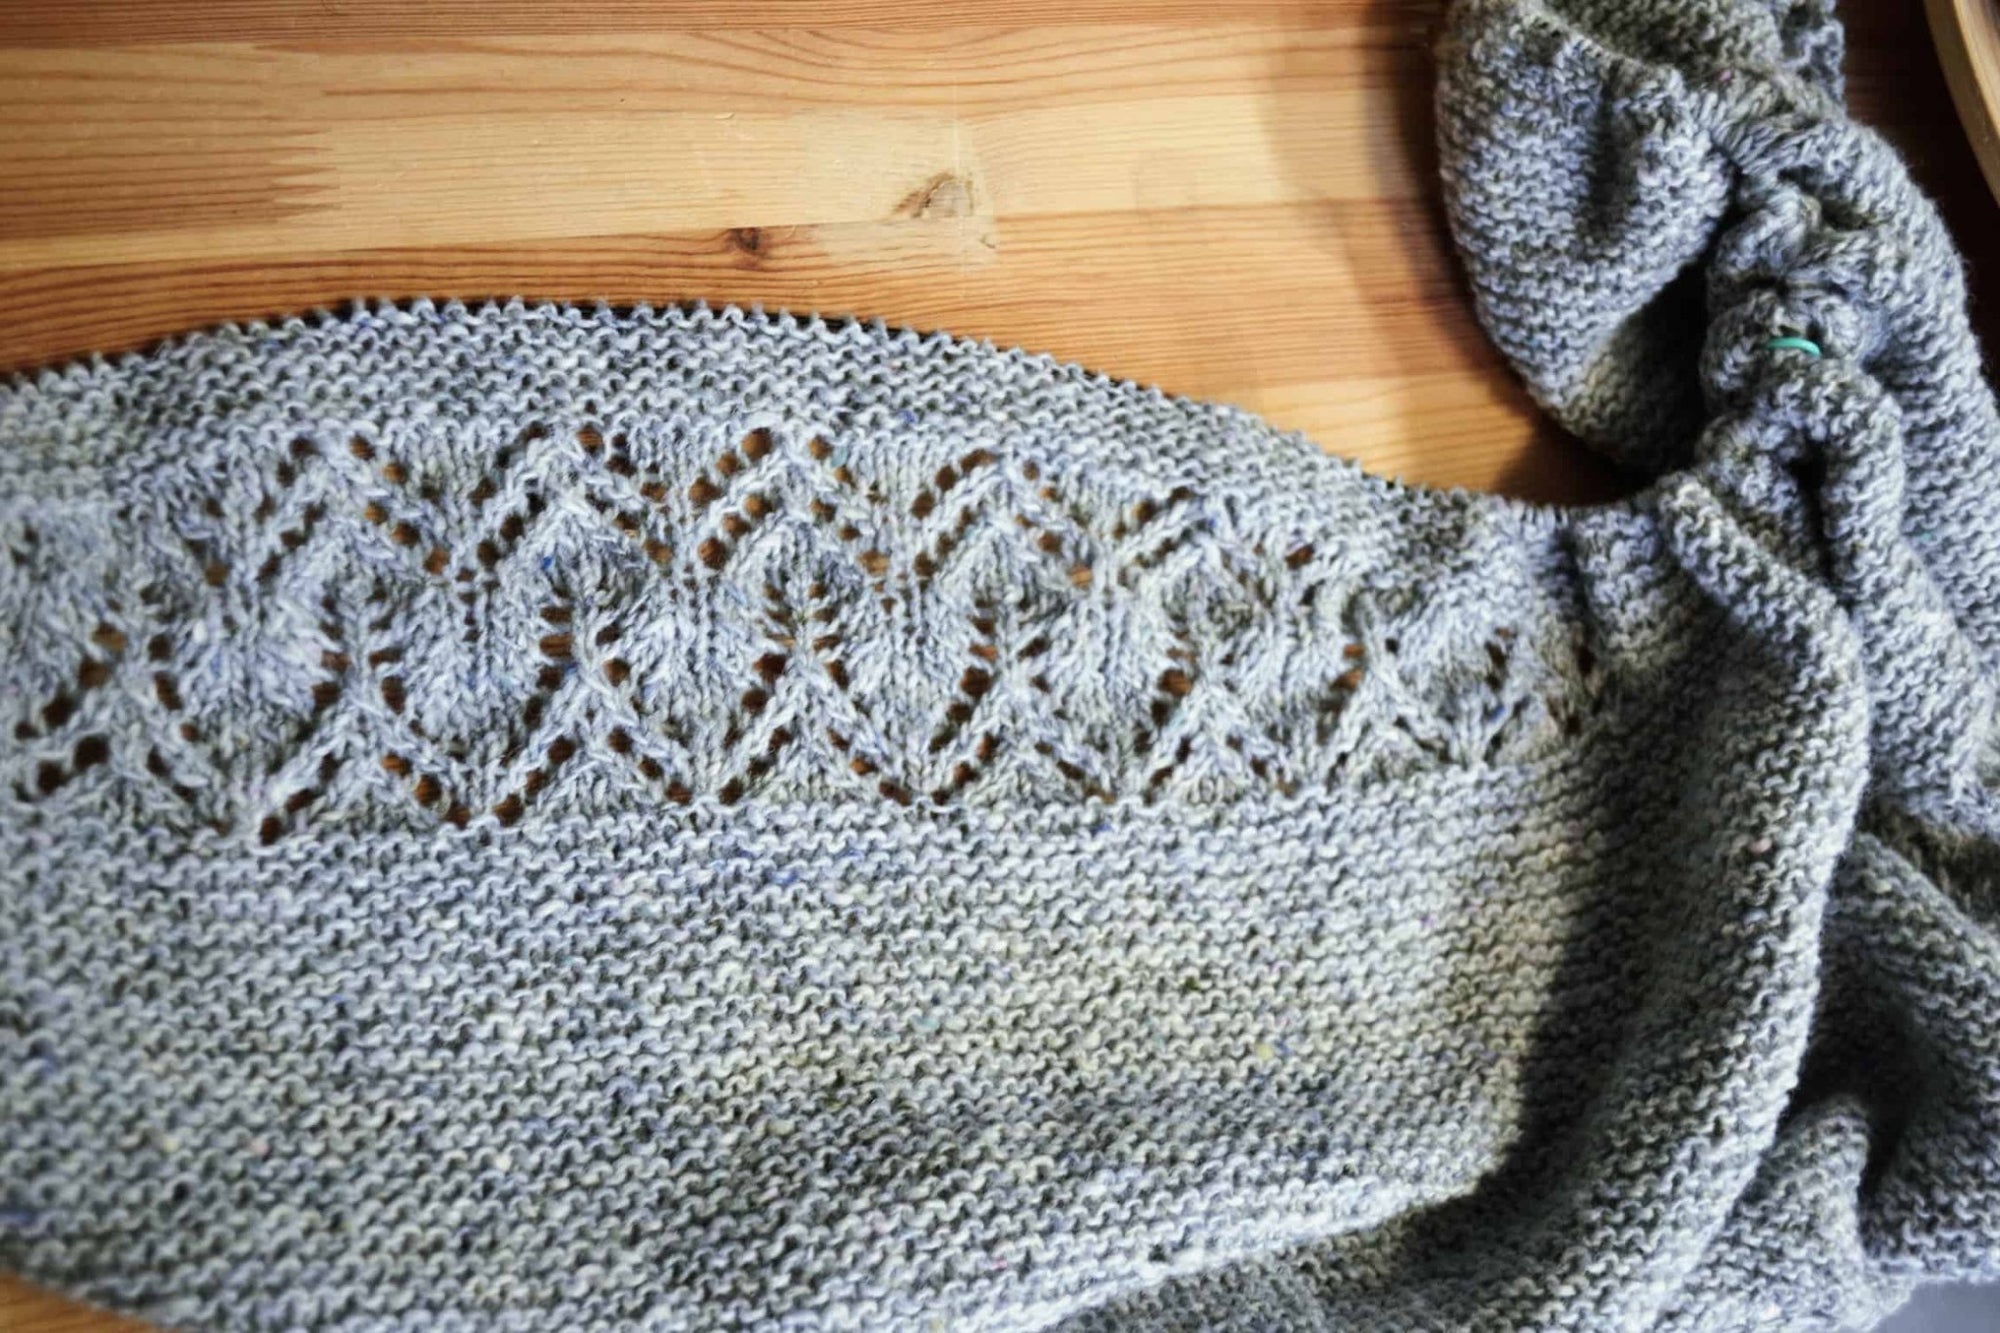 Spring KAL - Short Rows - This is Knit